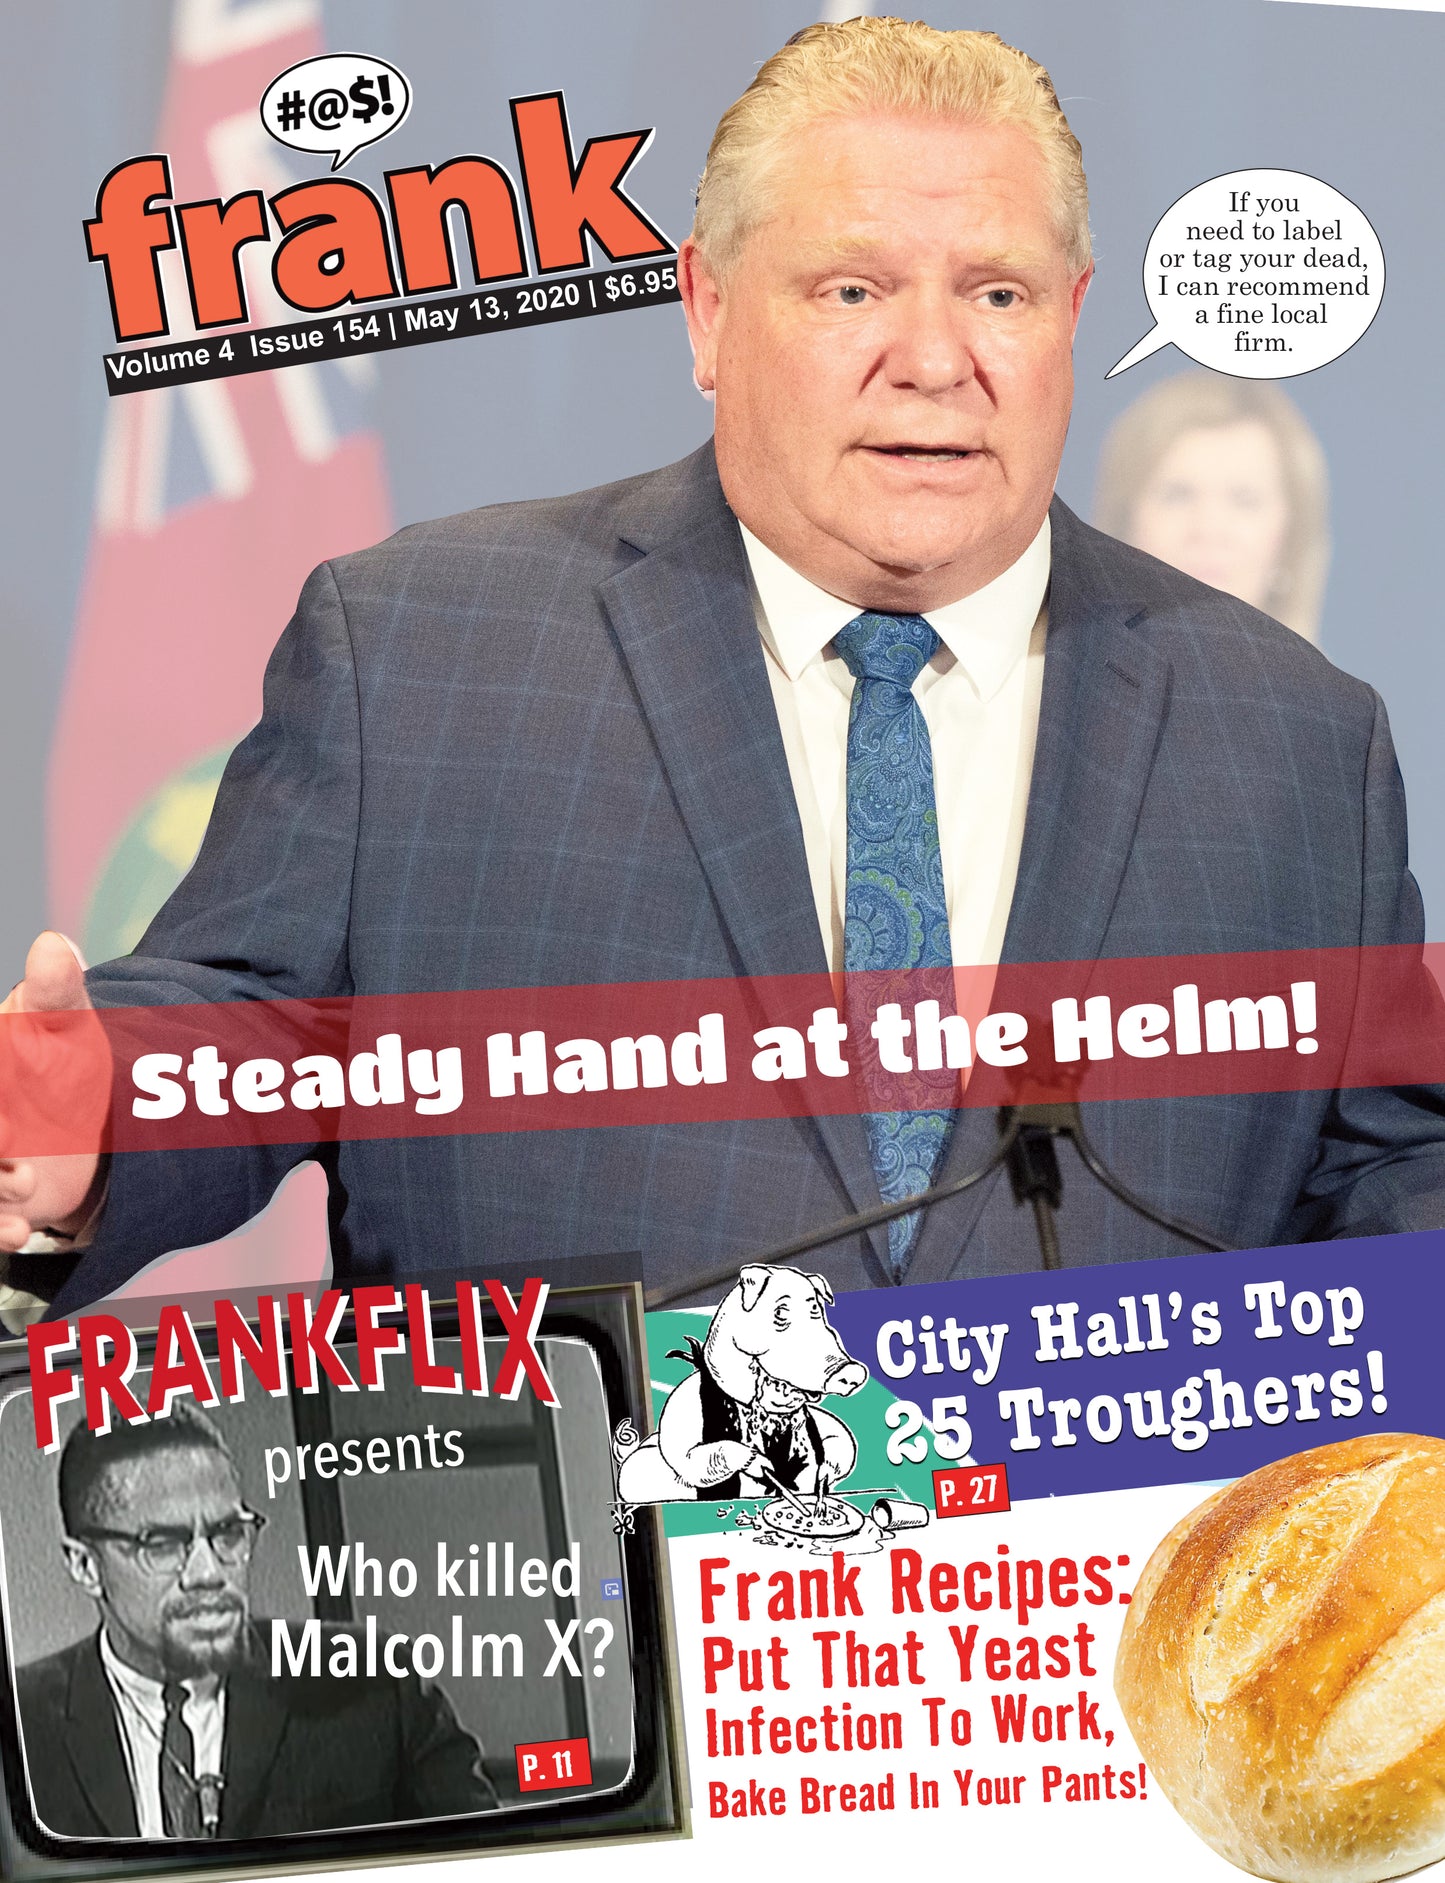 Vol 4, Issue 154 - Frank Magazine National Edition, Electronic Download (PDF)